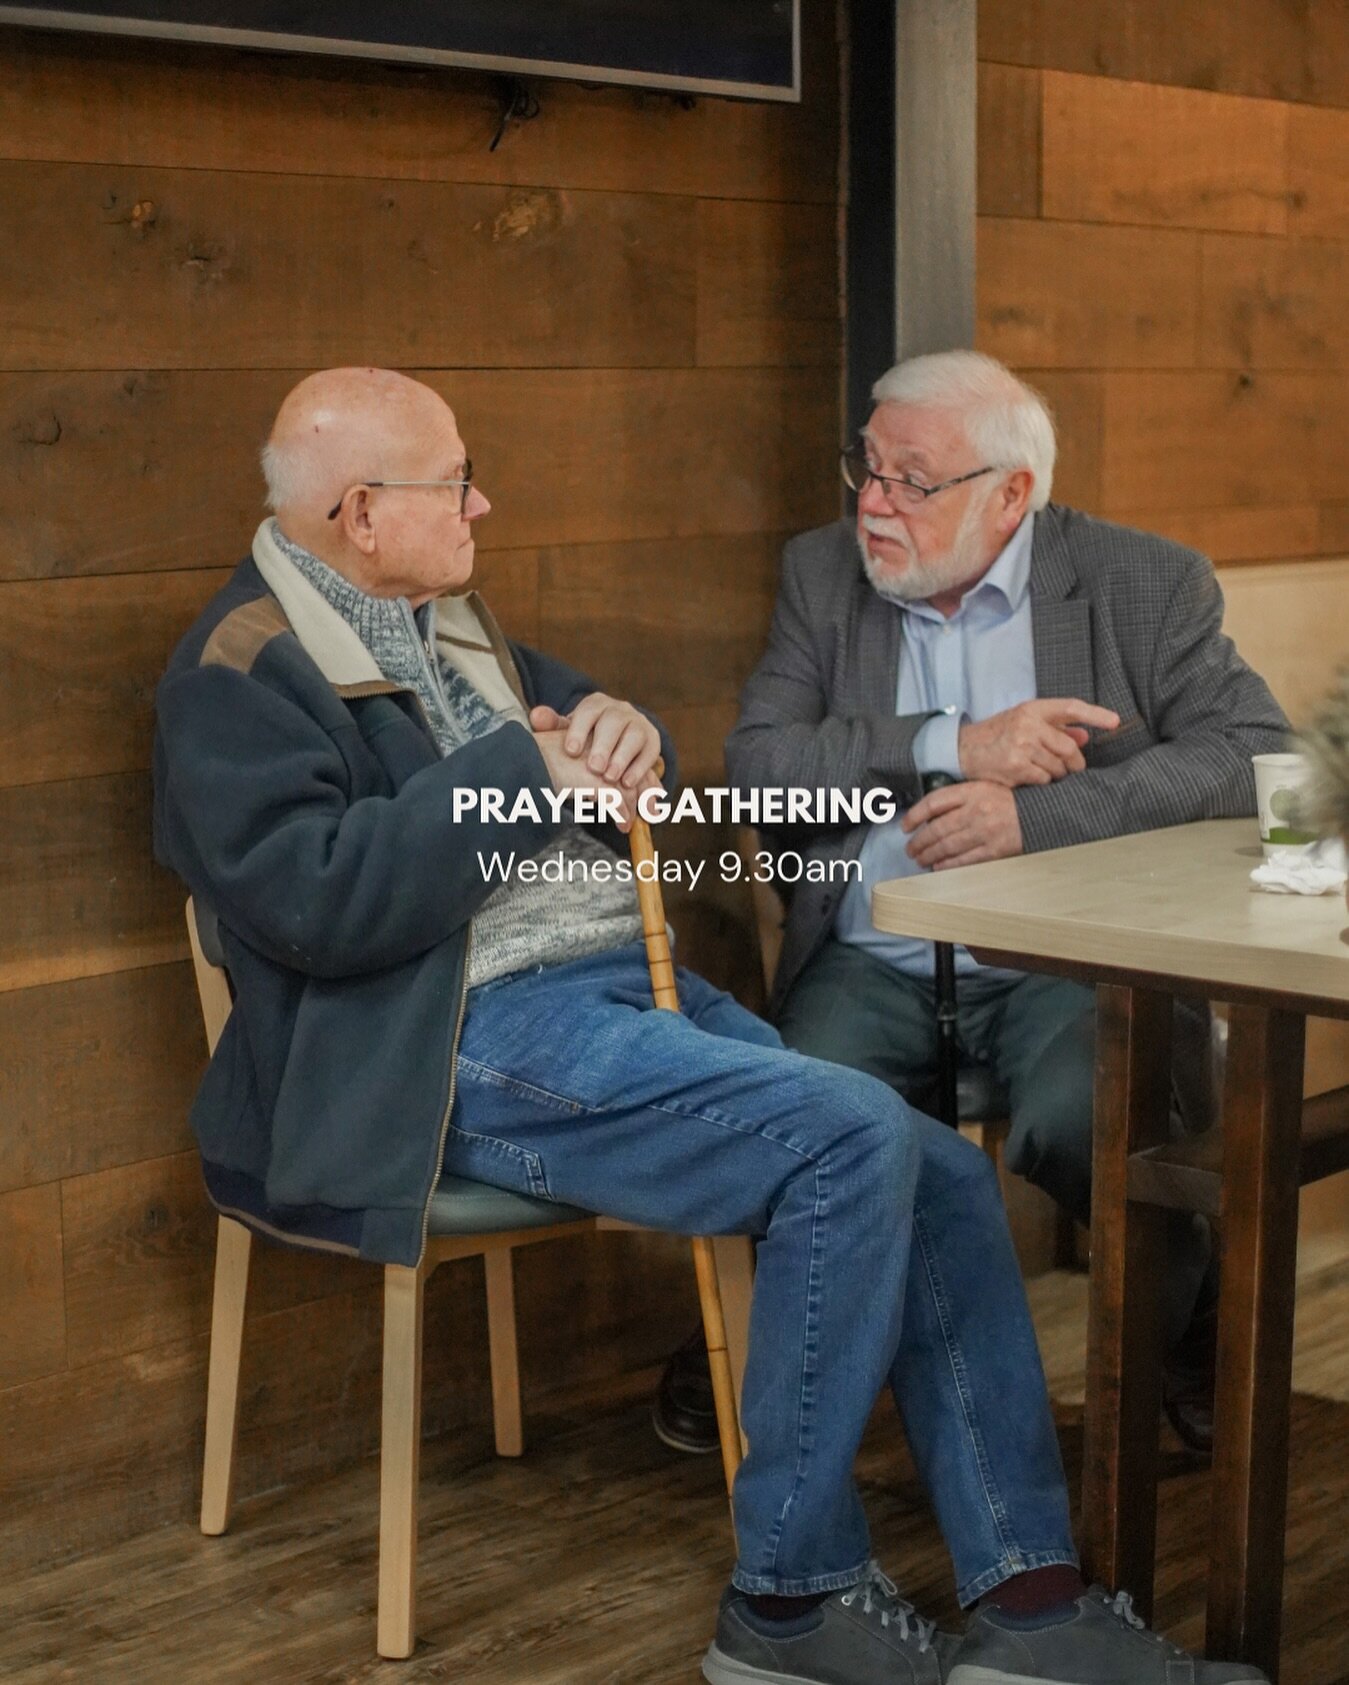 Join us in the morning for our 9.30am prayer gathering!

This is a weekly gathering that we hold to gather with our church family in prayer, so if you can&rsquo;t make it tomorrow we would love to see you any Wednesday morning at 9.30am in the prayer